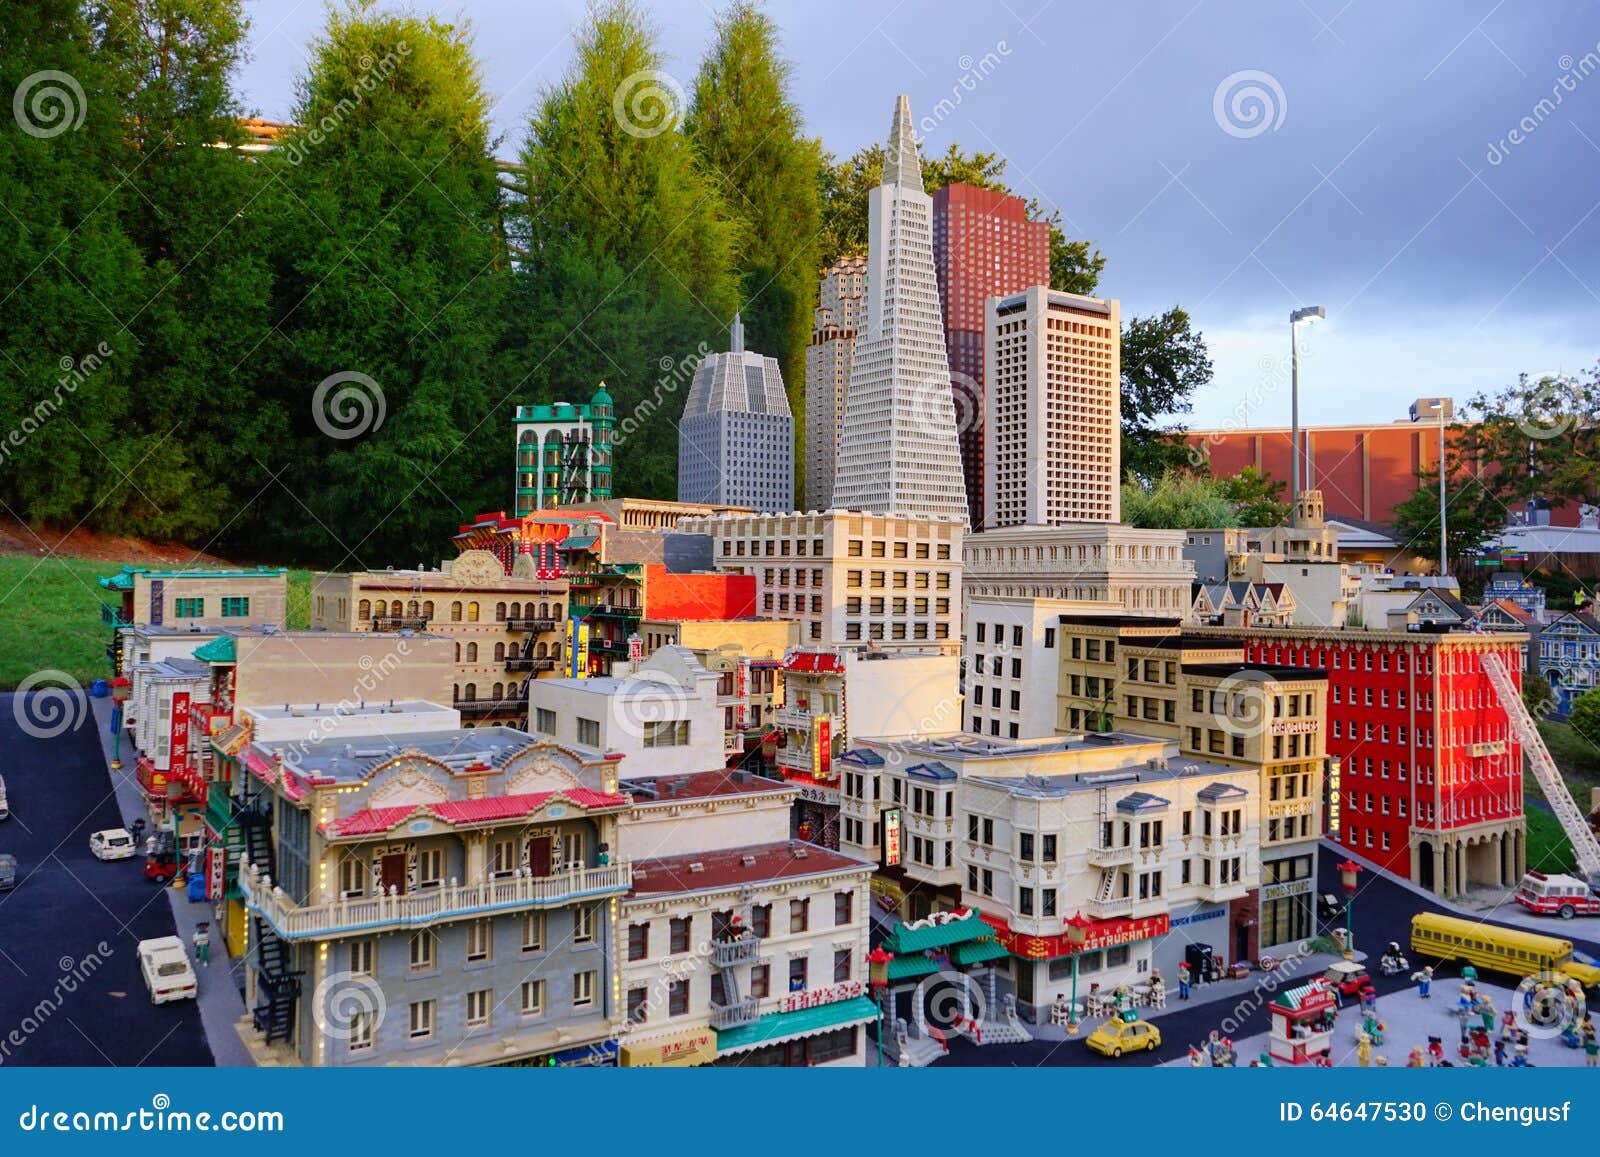 Lego mini city editorial image. of character, golden - 64647530